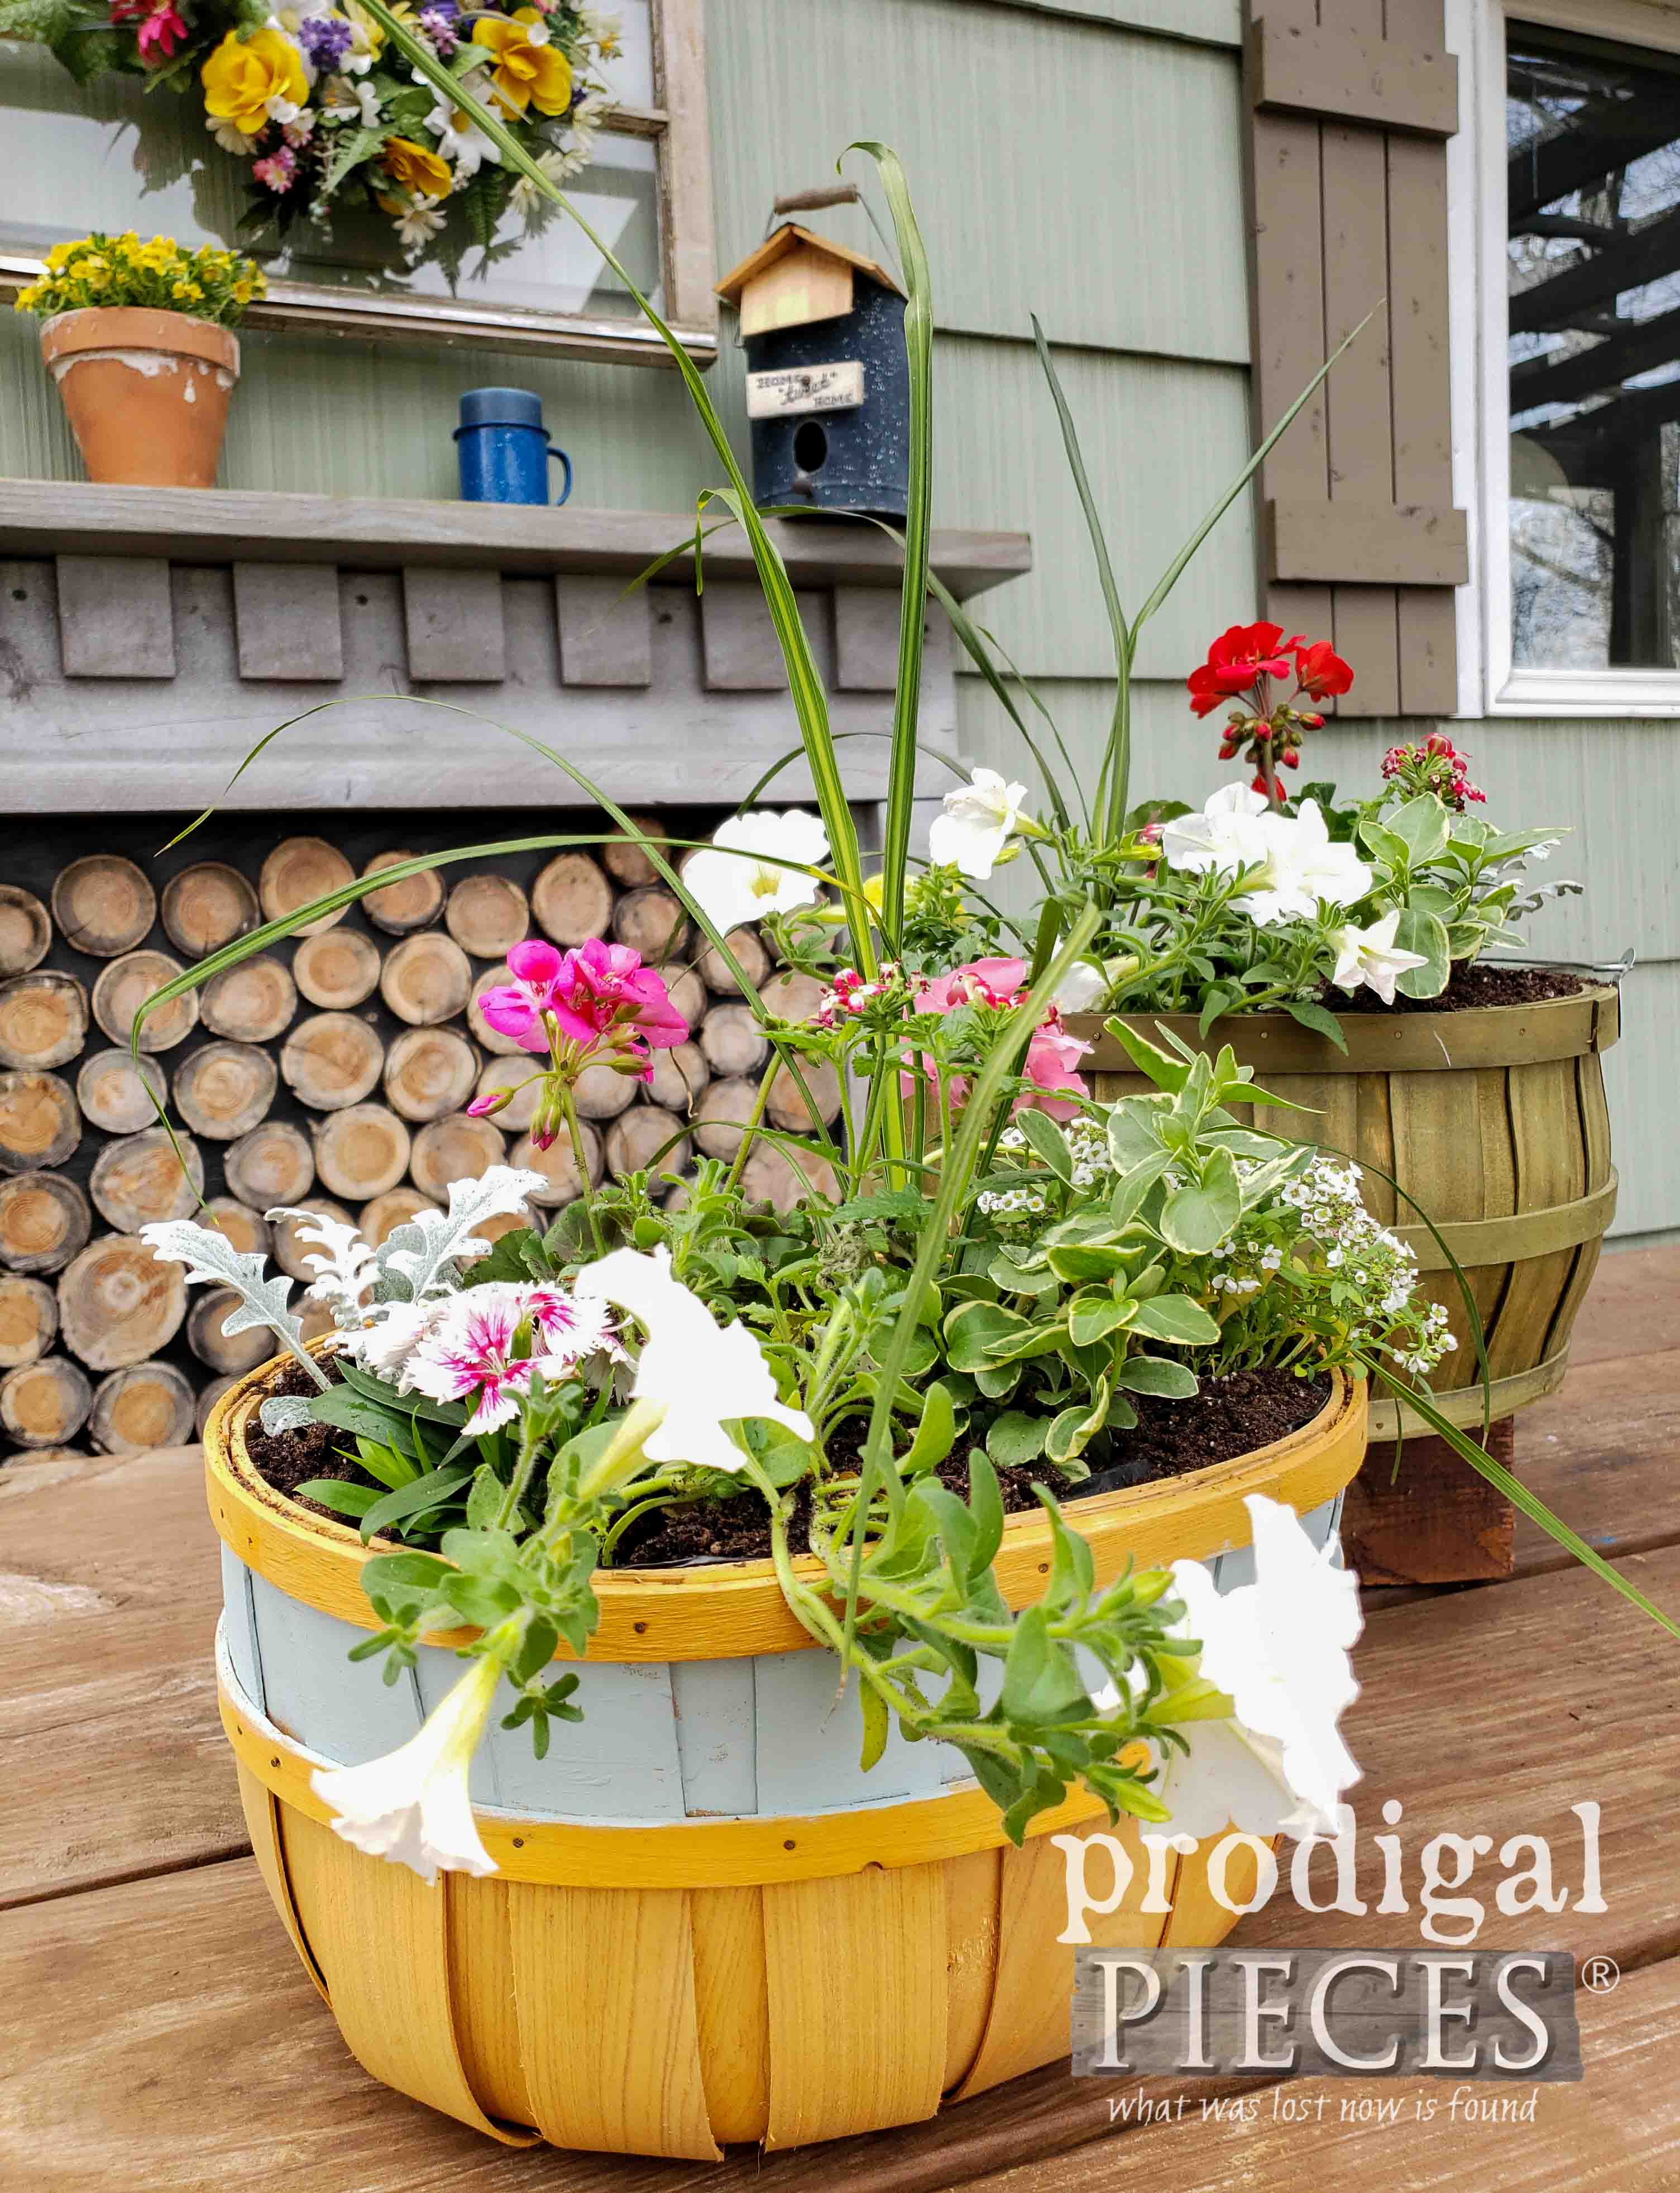 Spring Mothers Day Flower Basket DIY Gift Idea with Video Tutorial by Larissa of Prodigal Pieces | proodigalpieces.com #prodigalpieces #diy #home #mothersday #giftideas #flowers #home #garden